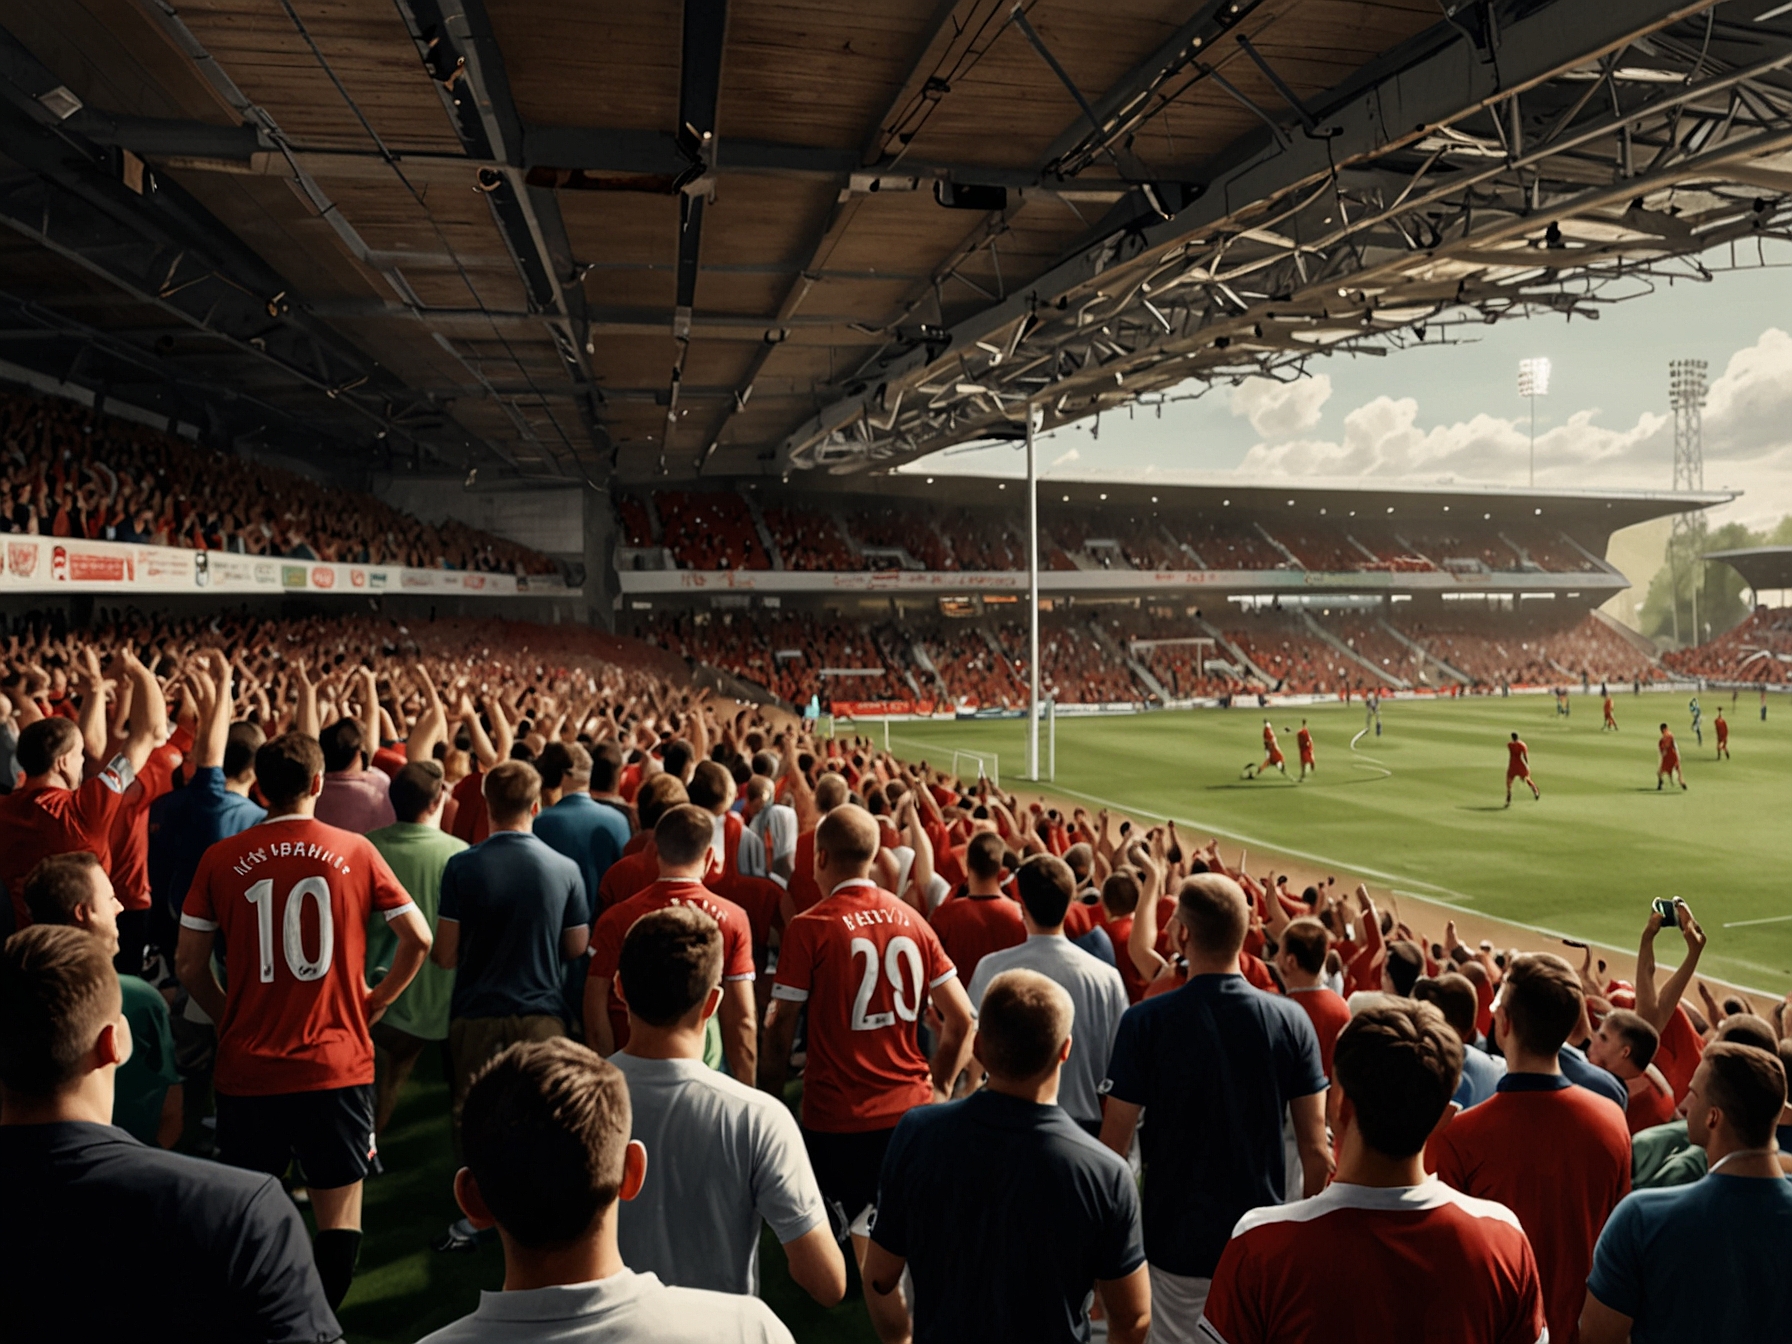 A packed Wrexham stadium with fans celebrating the new signing, illustrating the excitement and renewed hope among supporters for the upcoming season.